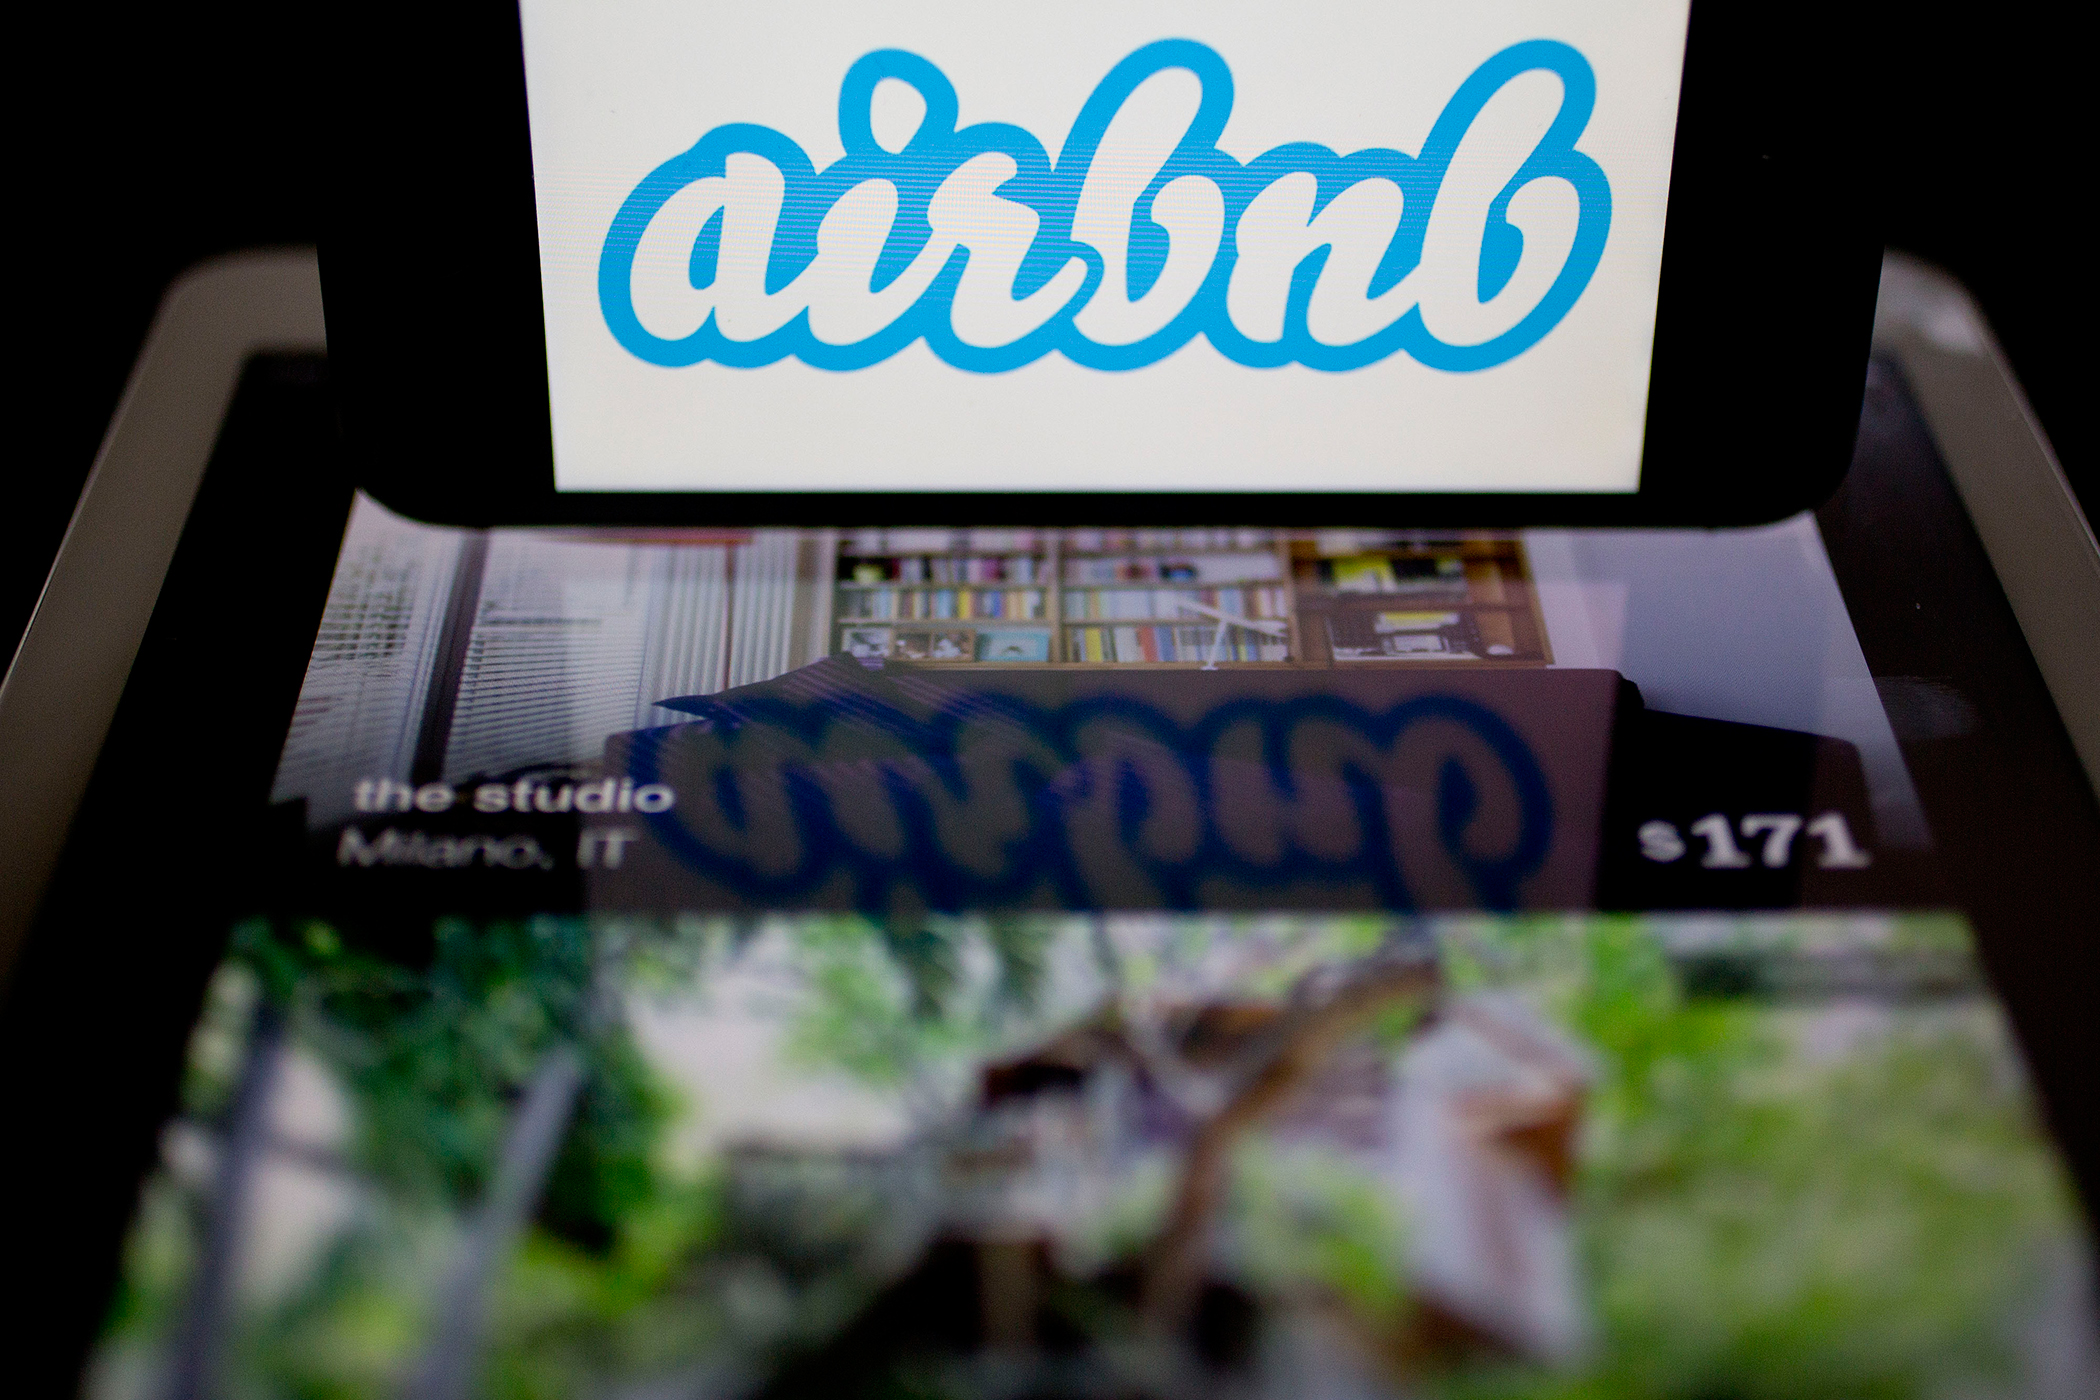 This City Wants to Tax Airbnb Hosts for Furniture, Sheets, and Cutlery